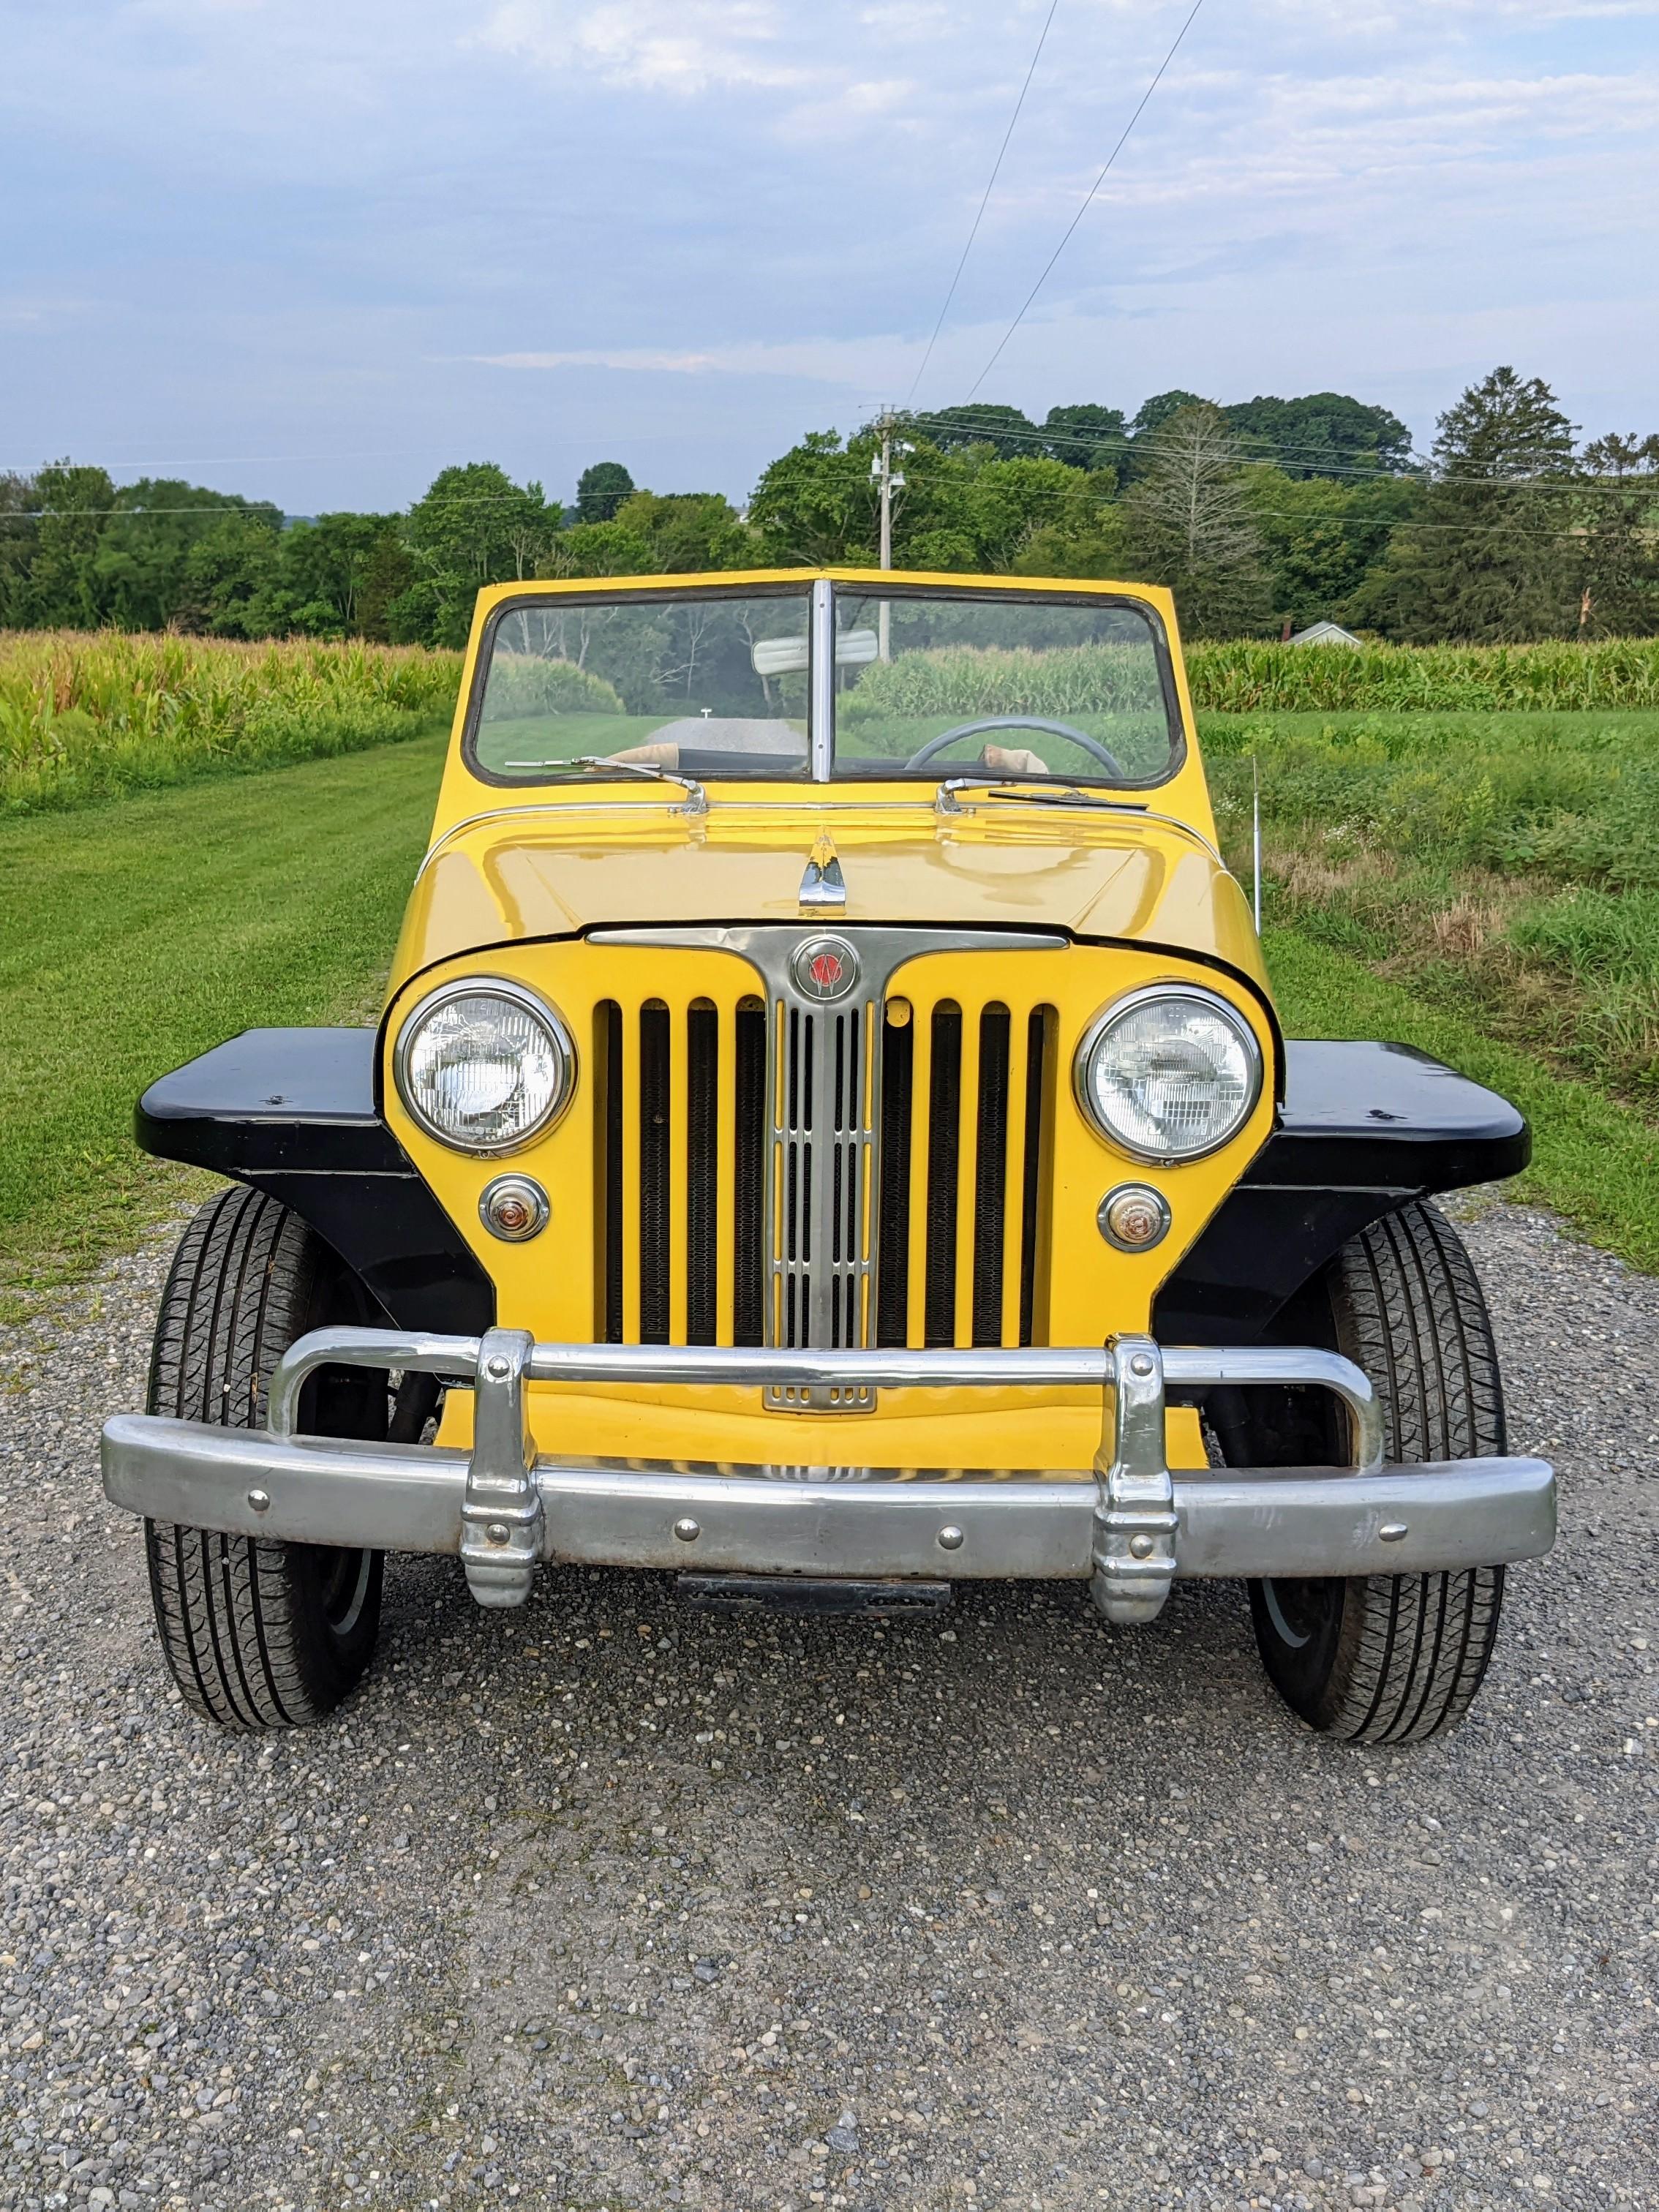 1949 Willys Jeepster Sdn. Reconstructed title. 6 cyl, 3 on the tree. 4x2, v